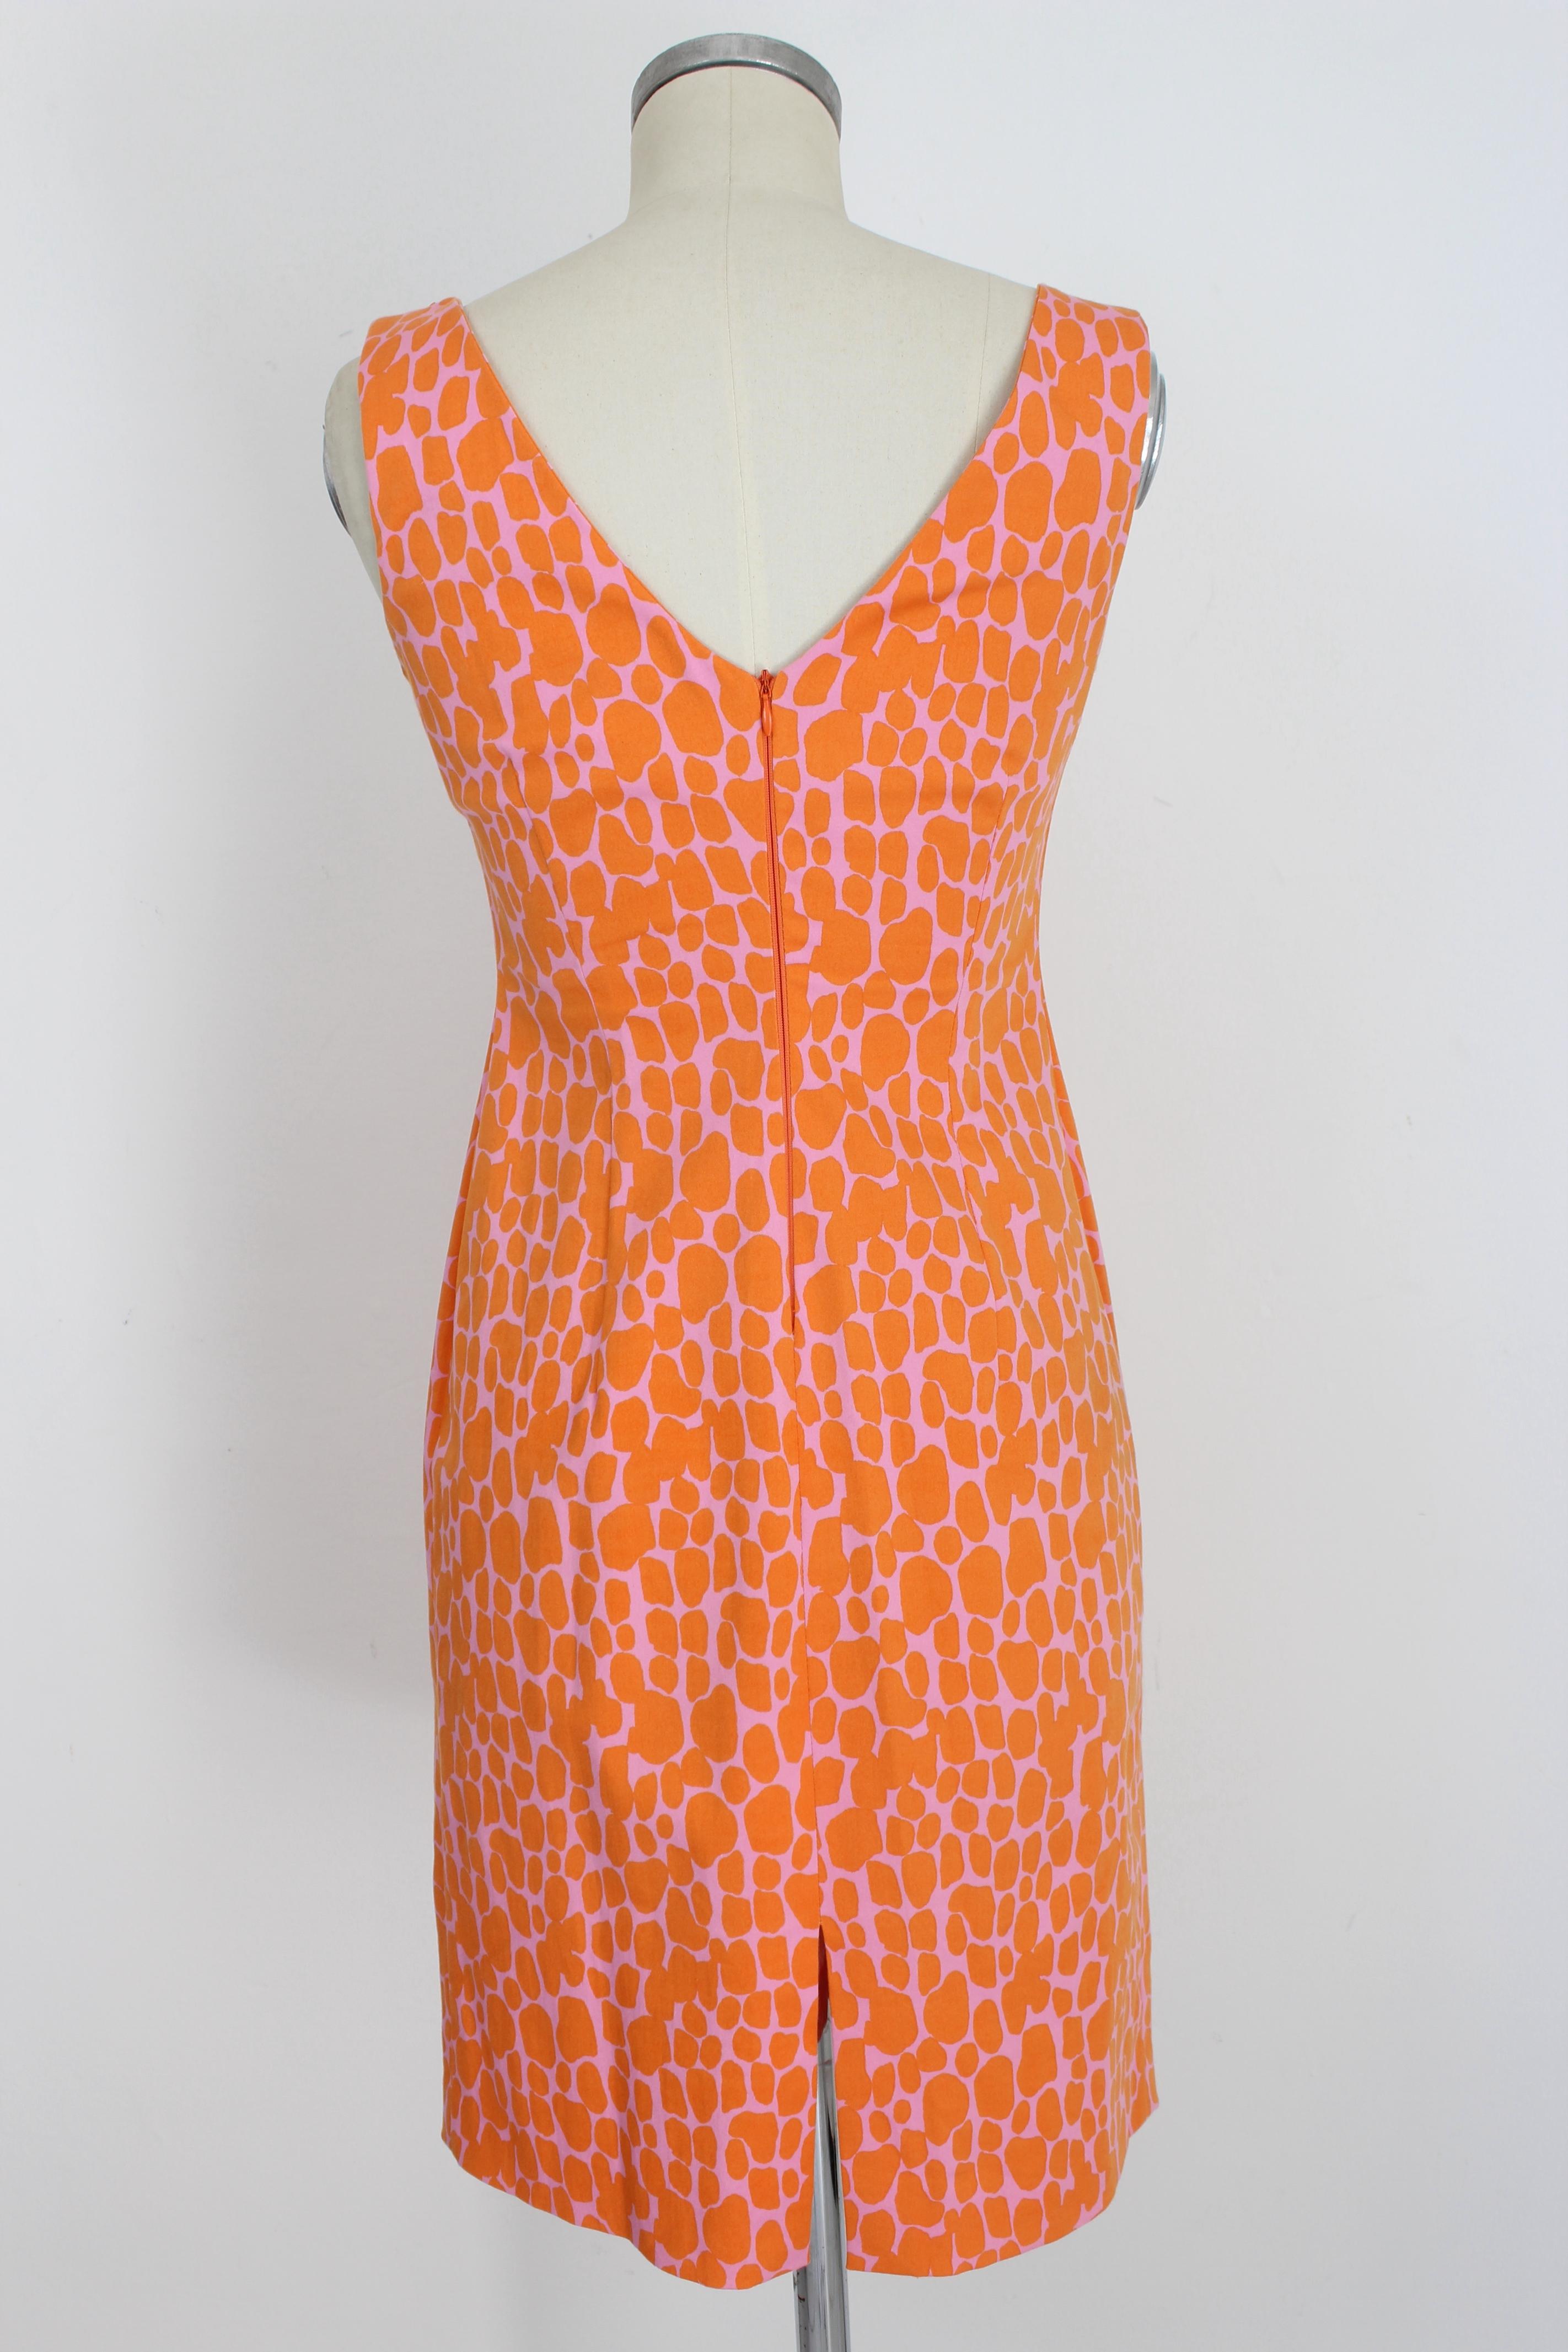 Blumarine 2000s dress. Orange and pink sheath dress with spotted pattern. Sequined applications on the chest. Zip closure along the back. 97% cotton, 3% spandex fabric. Made in Italy.

Size: 42 It 8 Us 10 Uk 

Shoulder: 40 cm
Bust / Chest: 44